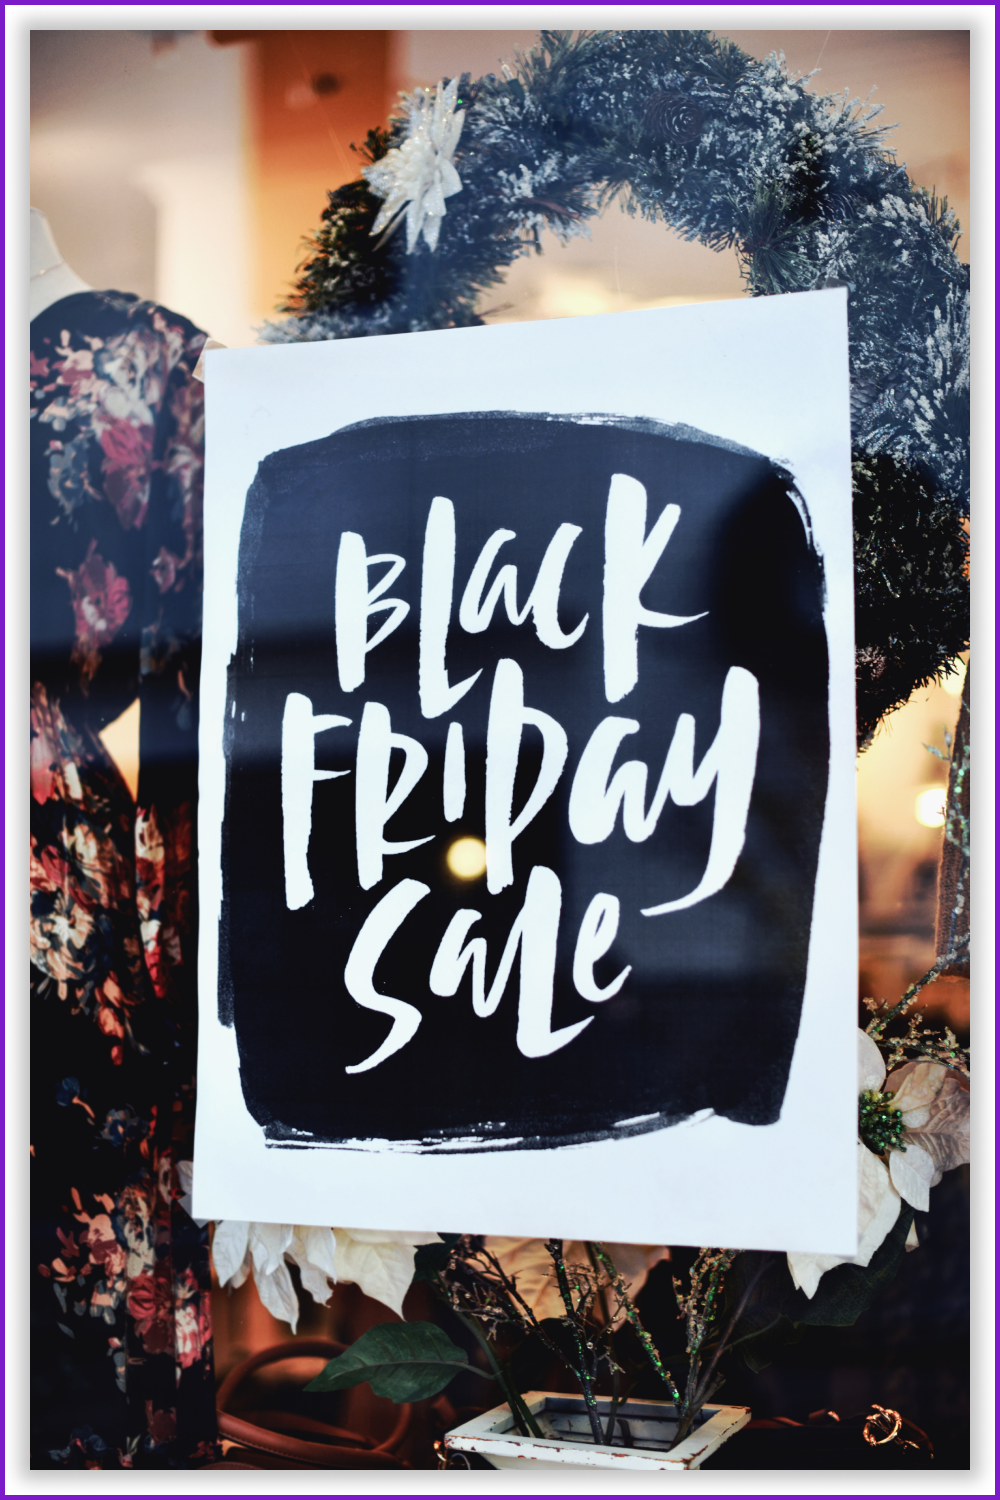 Poster with white background and black spot with white lettering Black Friday Sale.